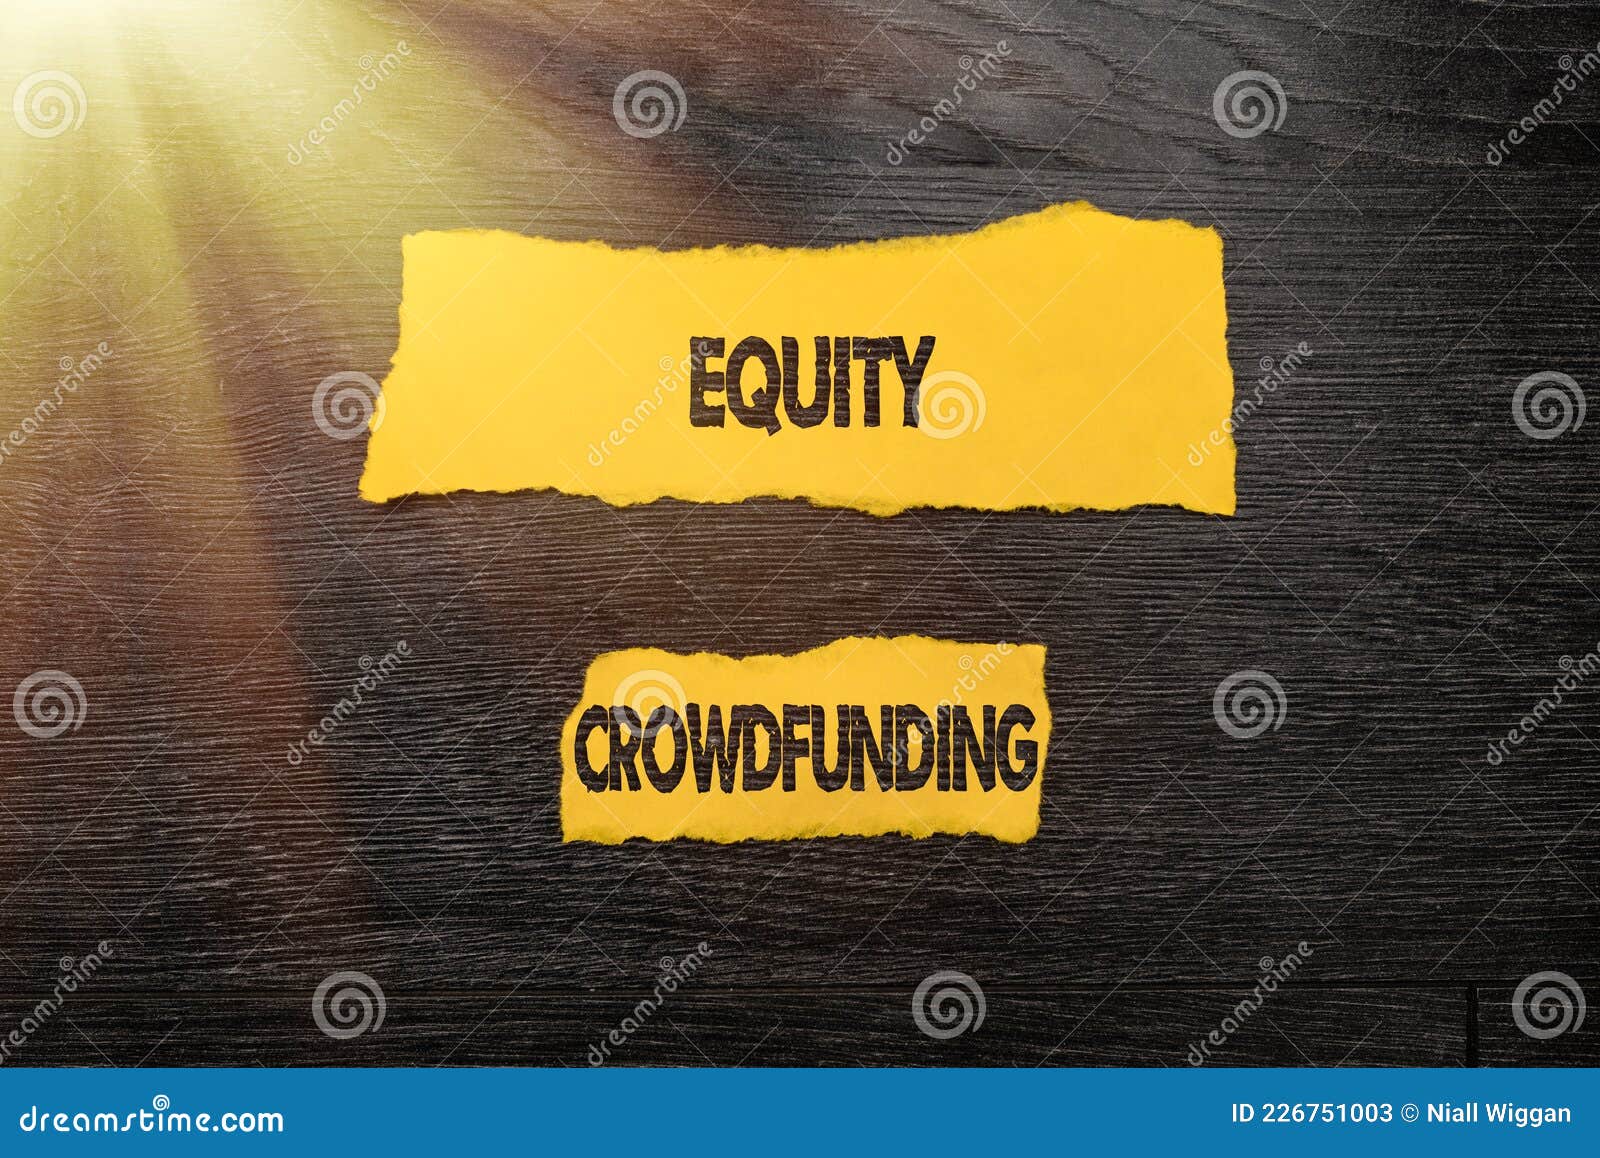 hand writing sign equity crowdfunding. business approach raising capital used by startups and earlystage company bright